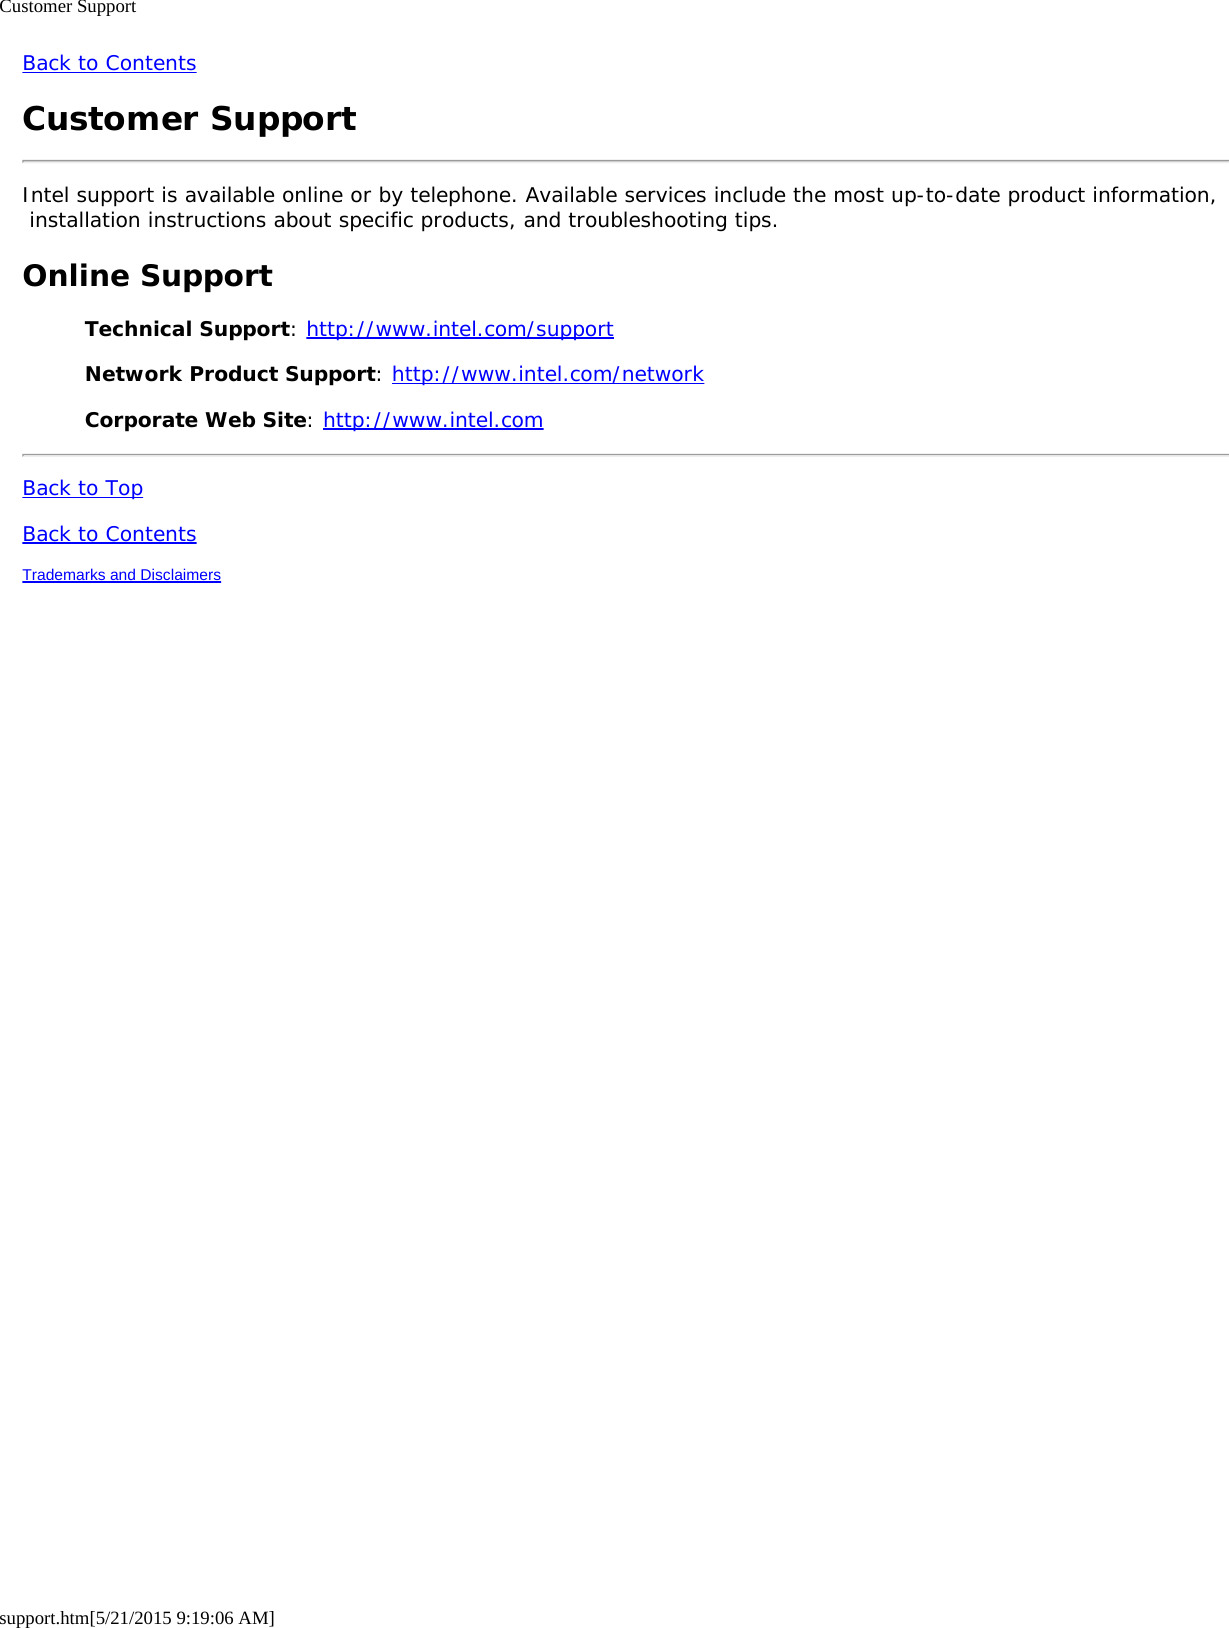 Customer Supportsupport.htm[5/21/2015 9:19:06 AM]Back to ContentsCustomer SupportIntel support is available online or by telephone. Available services include the most up-to-date product information, installation instructions about specific products, and troubleshooting tips.Online SupportTechnical Support: http://www.intel.com/supportNetwork Product Support: http://www.intel.com/networkCorporate Web Site: http://www.intel.comBack to TopBack to ContentsTrademarks and Disclaimers